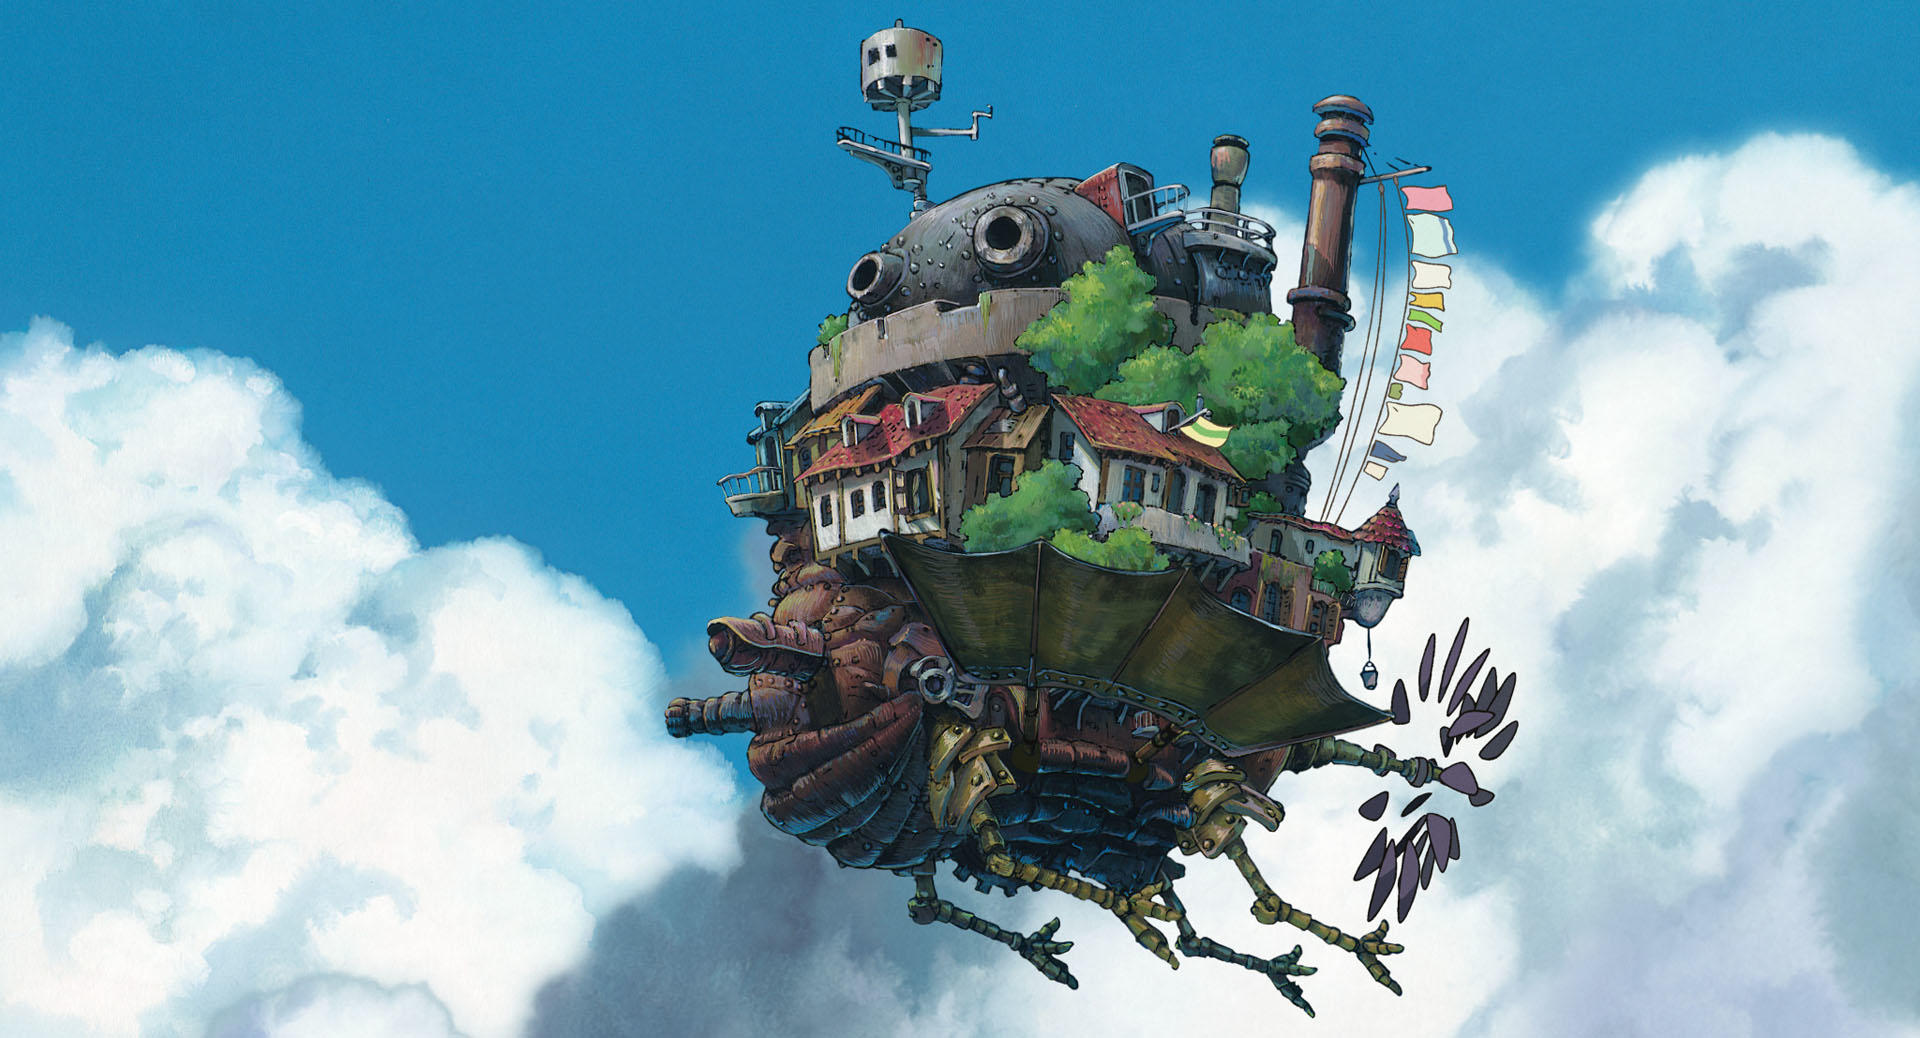 An image from a Ghibli film to calm the chaos of this site.